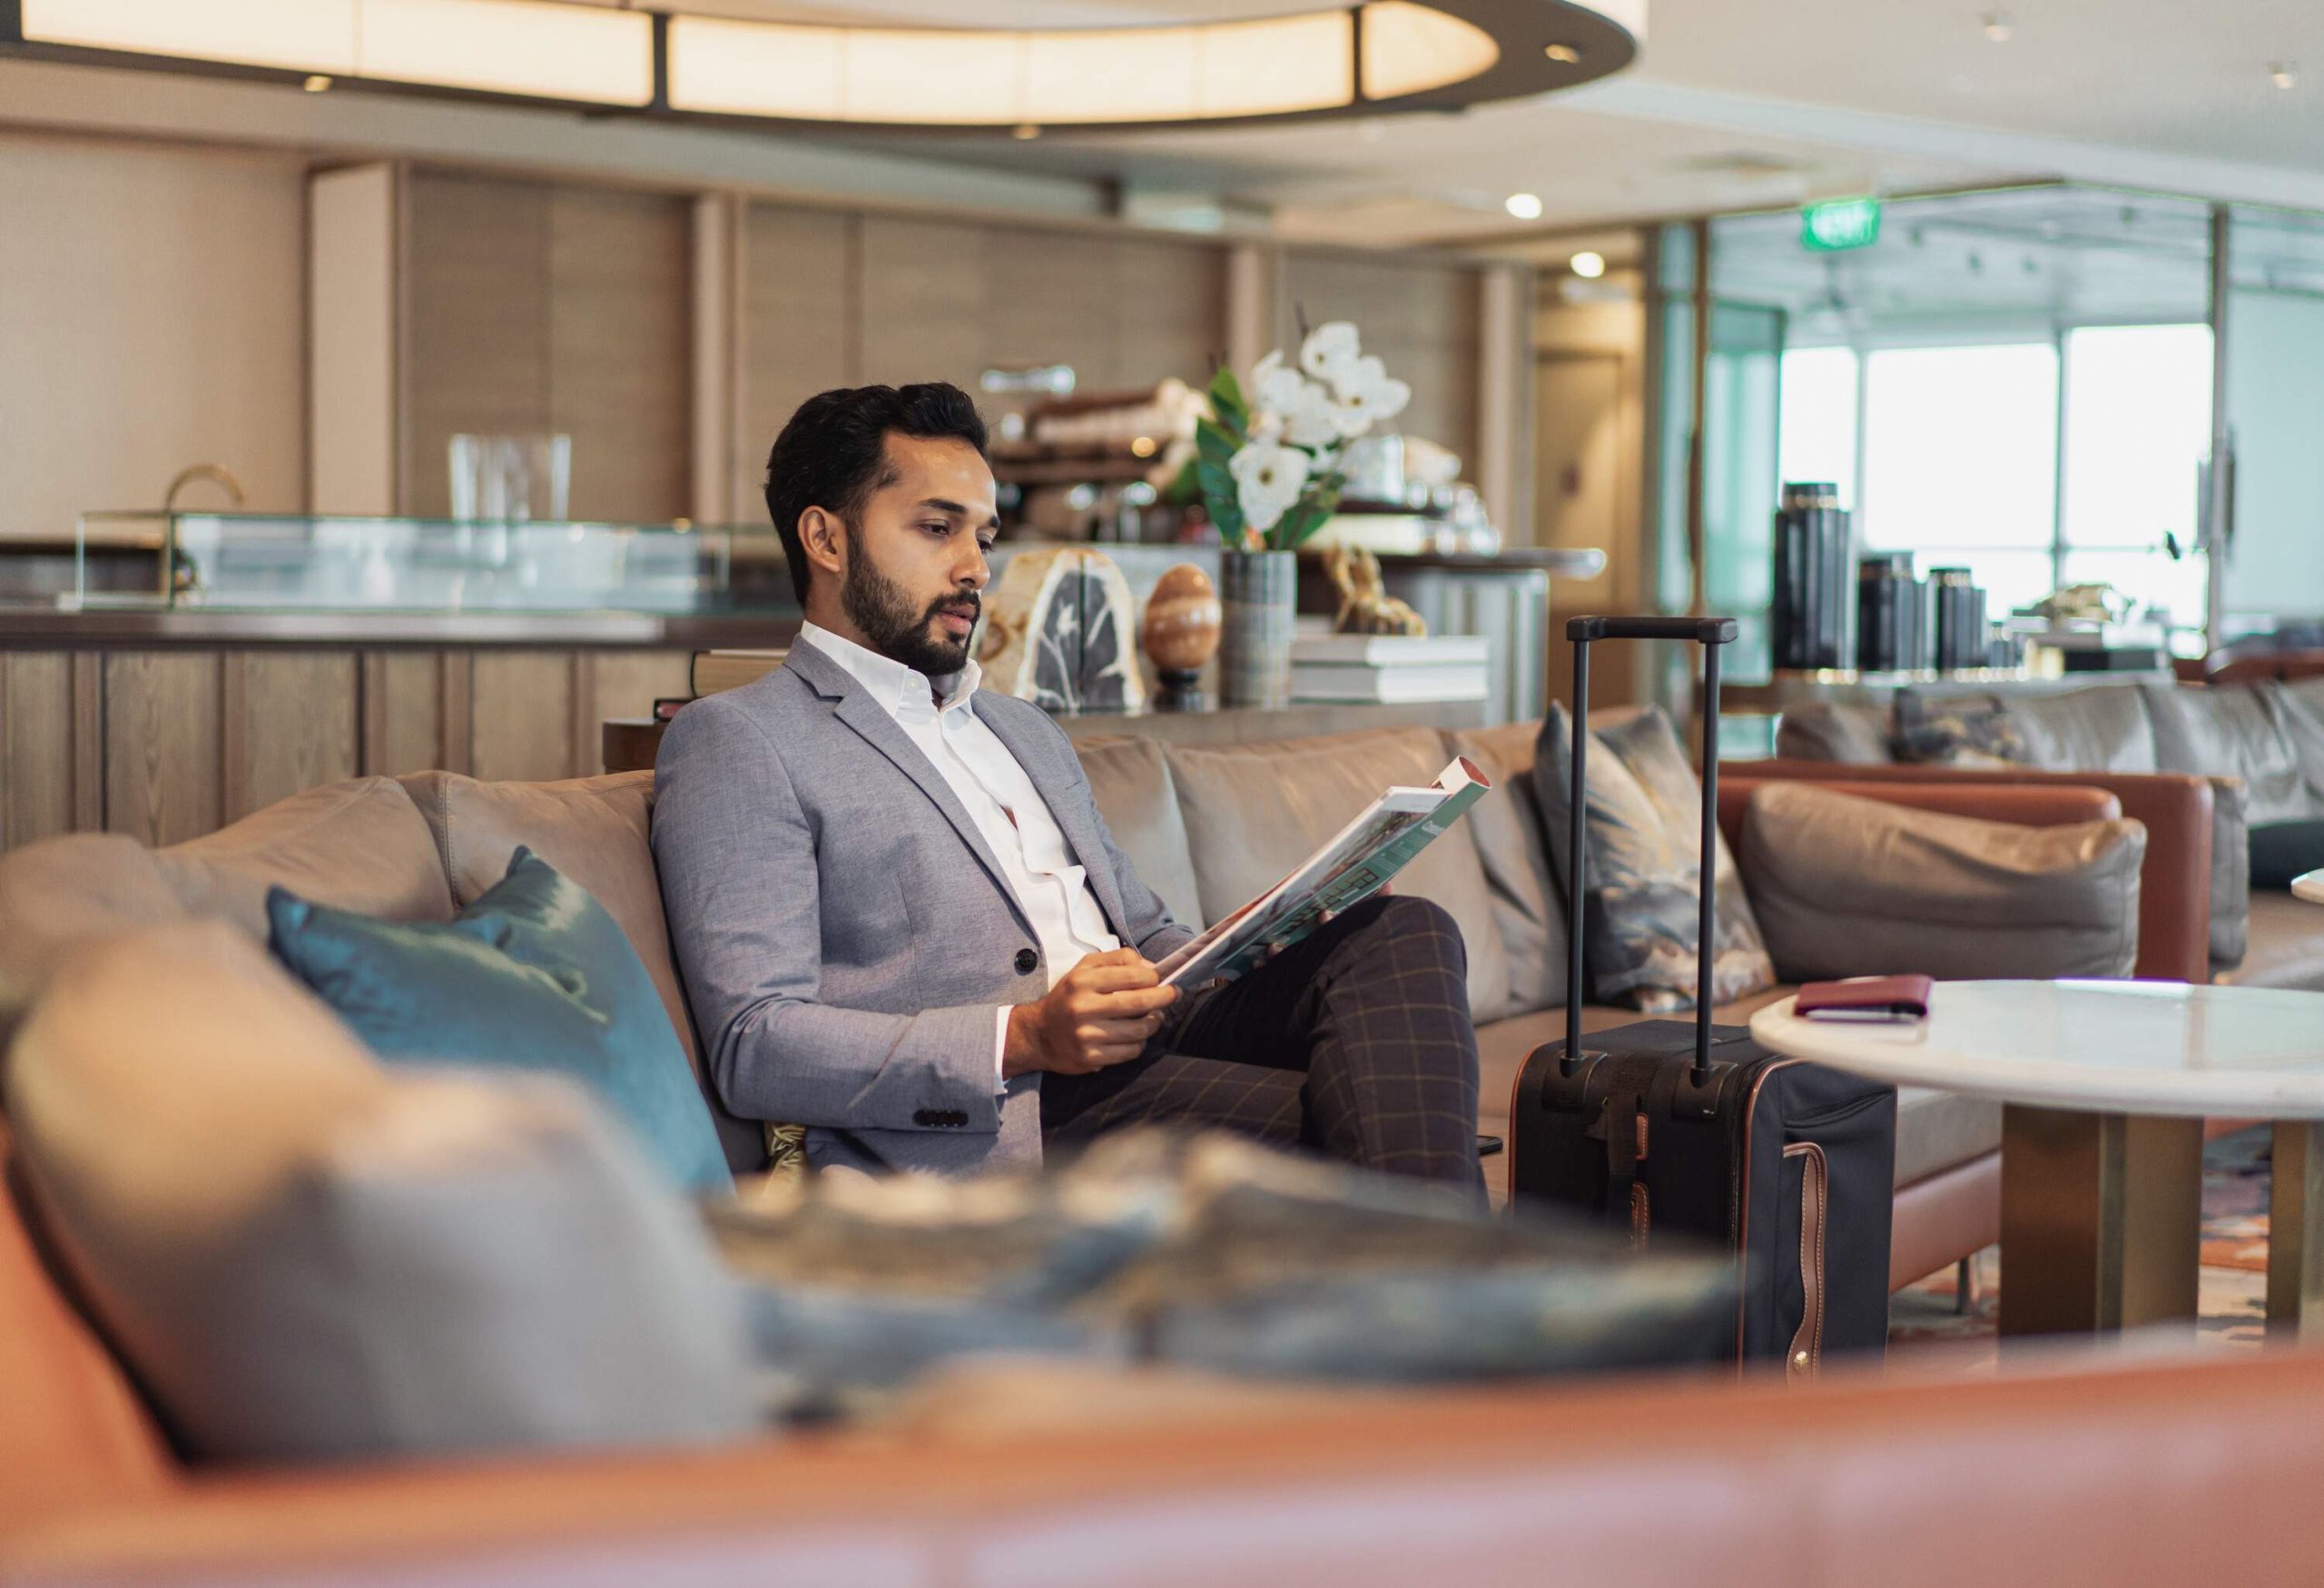 dest_singapore_airport_lounge_person_man_gettyimages-1401523867